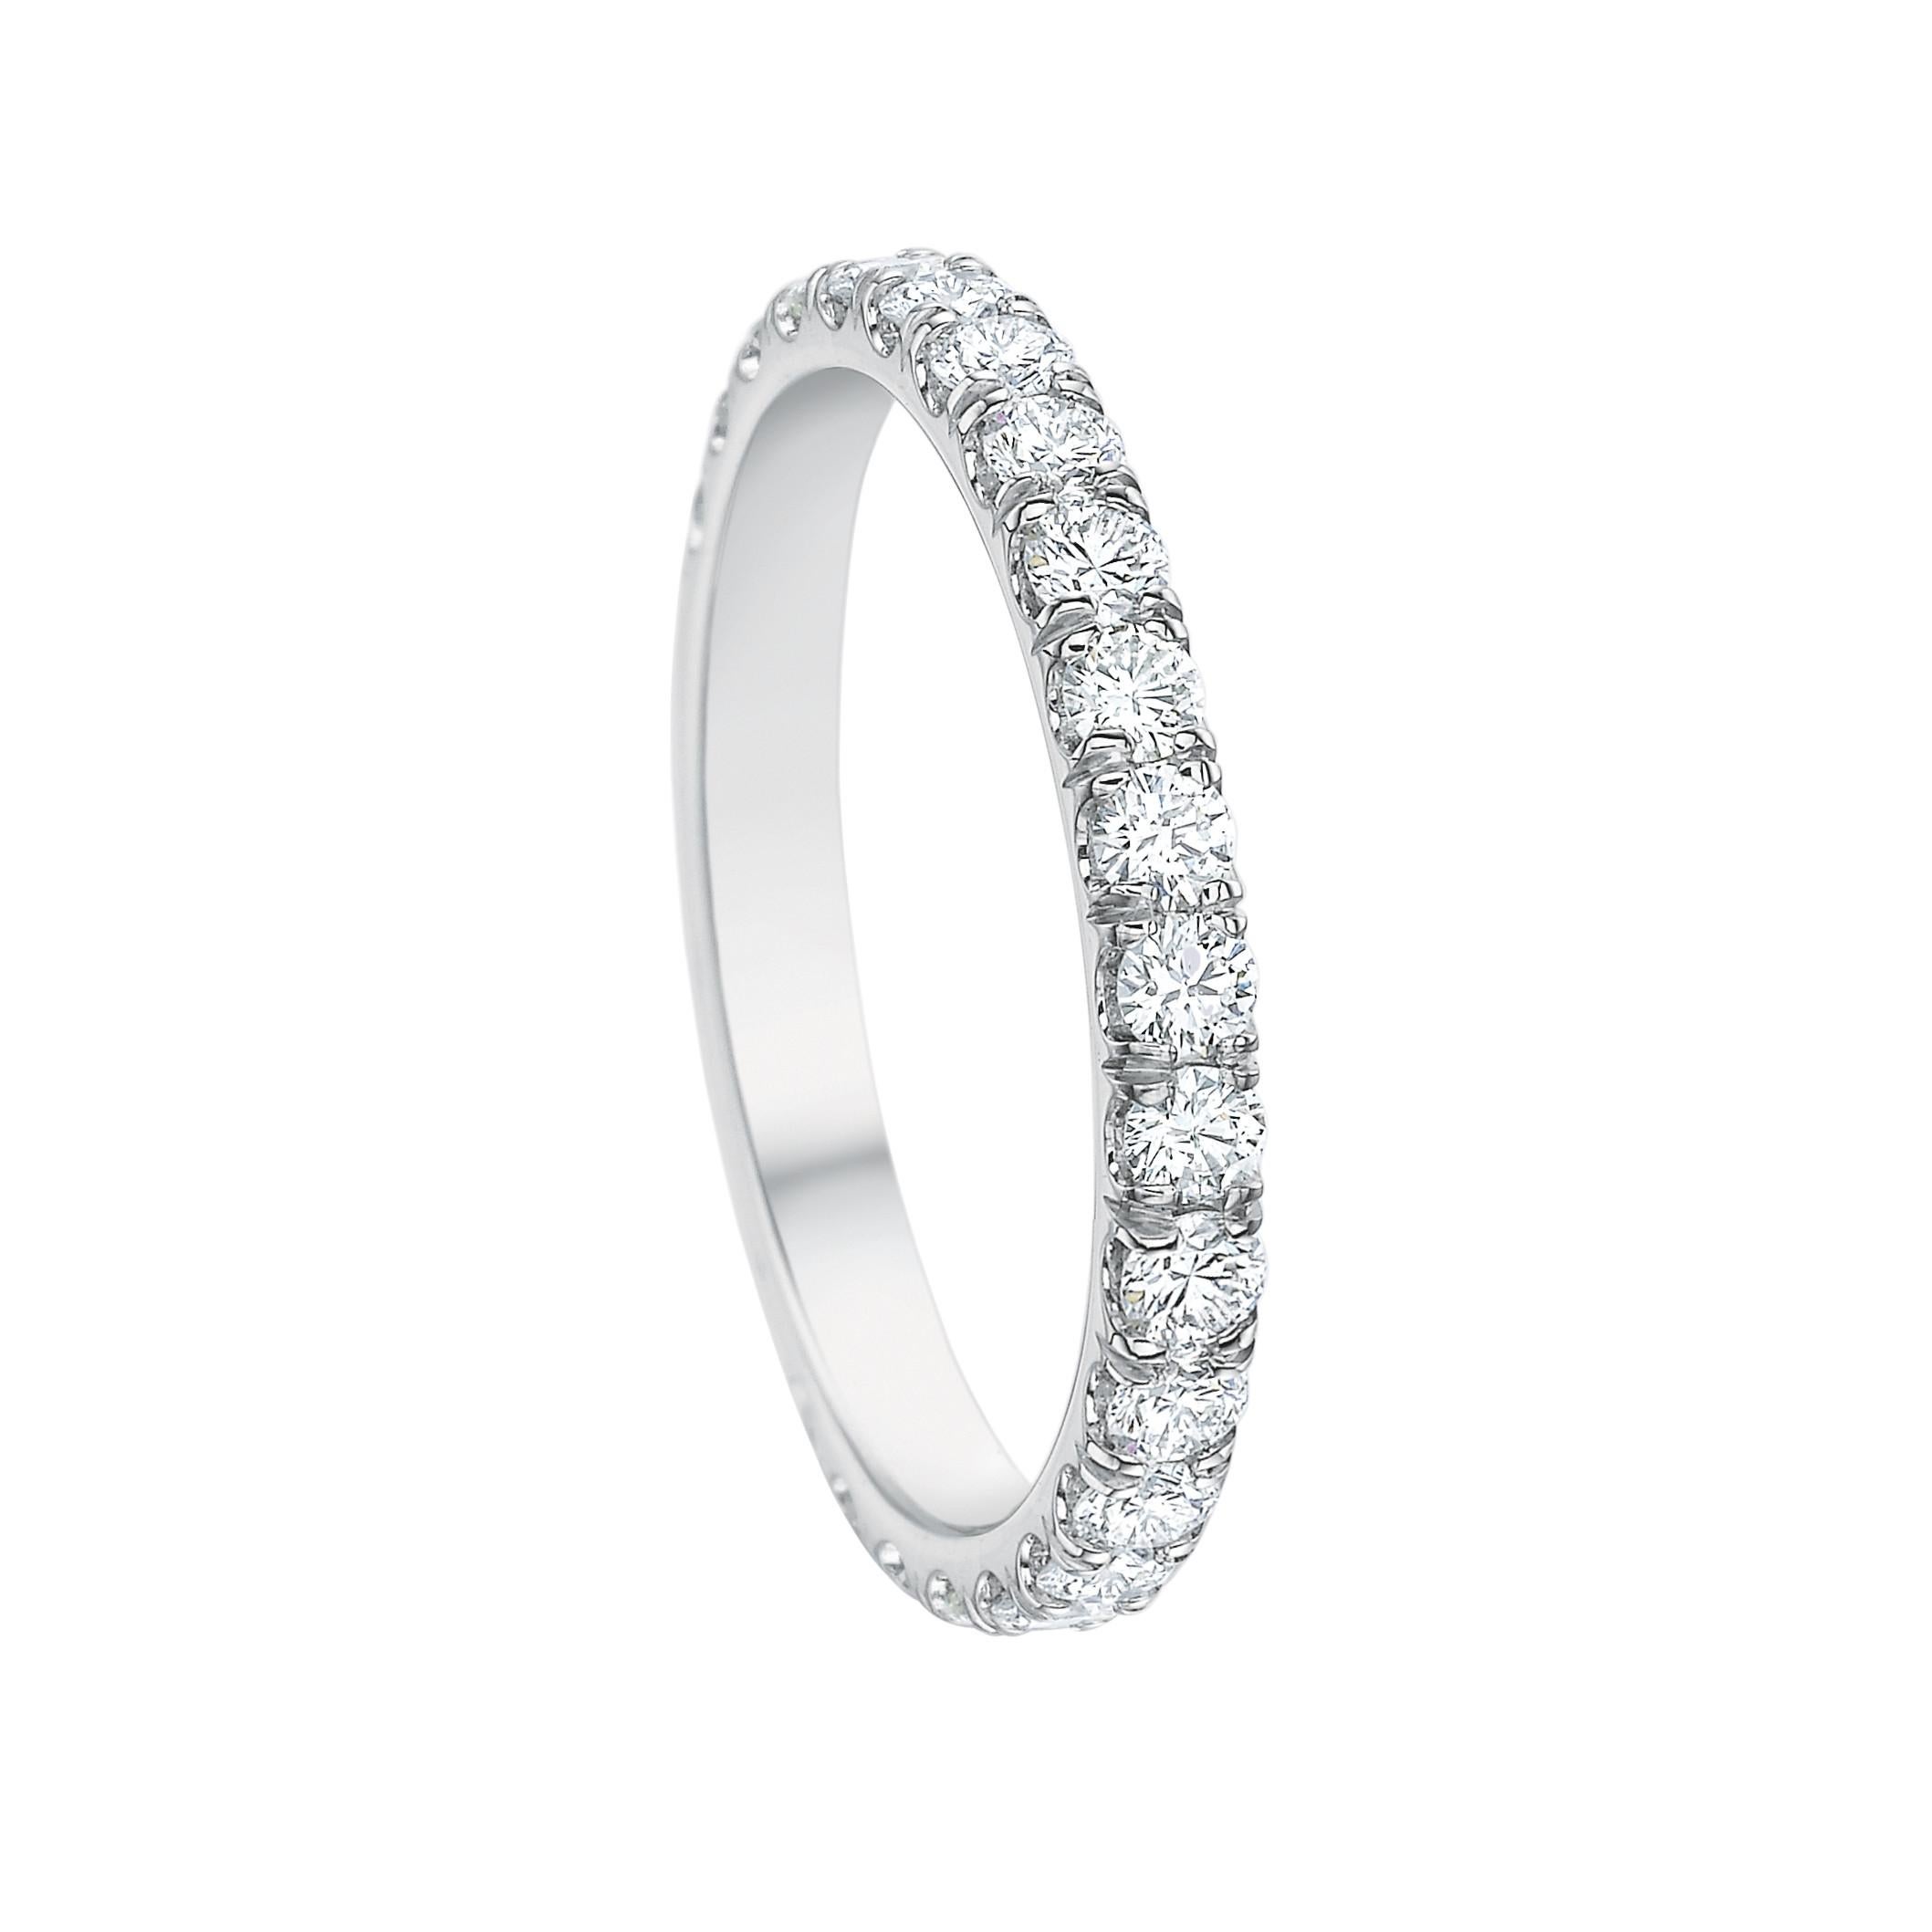 Diamond eternity band ring, showcasing round brilliant-cut diamonds set in a 'comfort fit' platinum mounting.

Twenty-eight diamonds weighing 1.00 total carats
2.1mm wide
Size 6